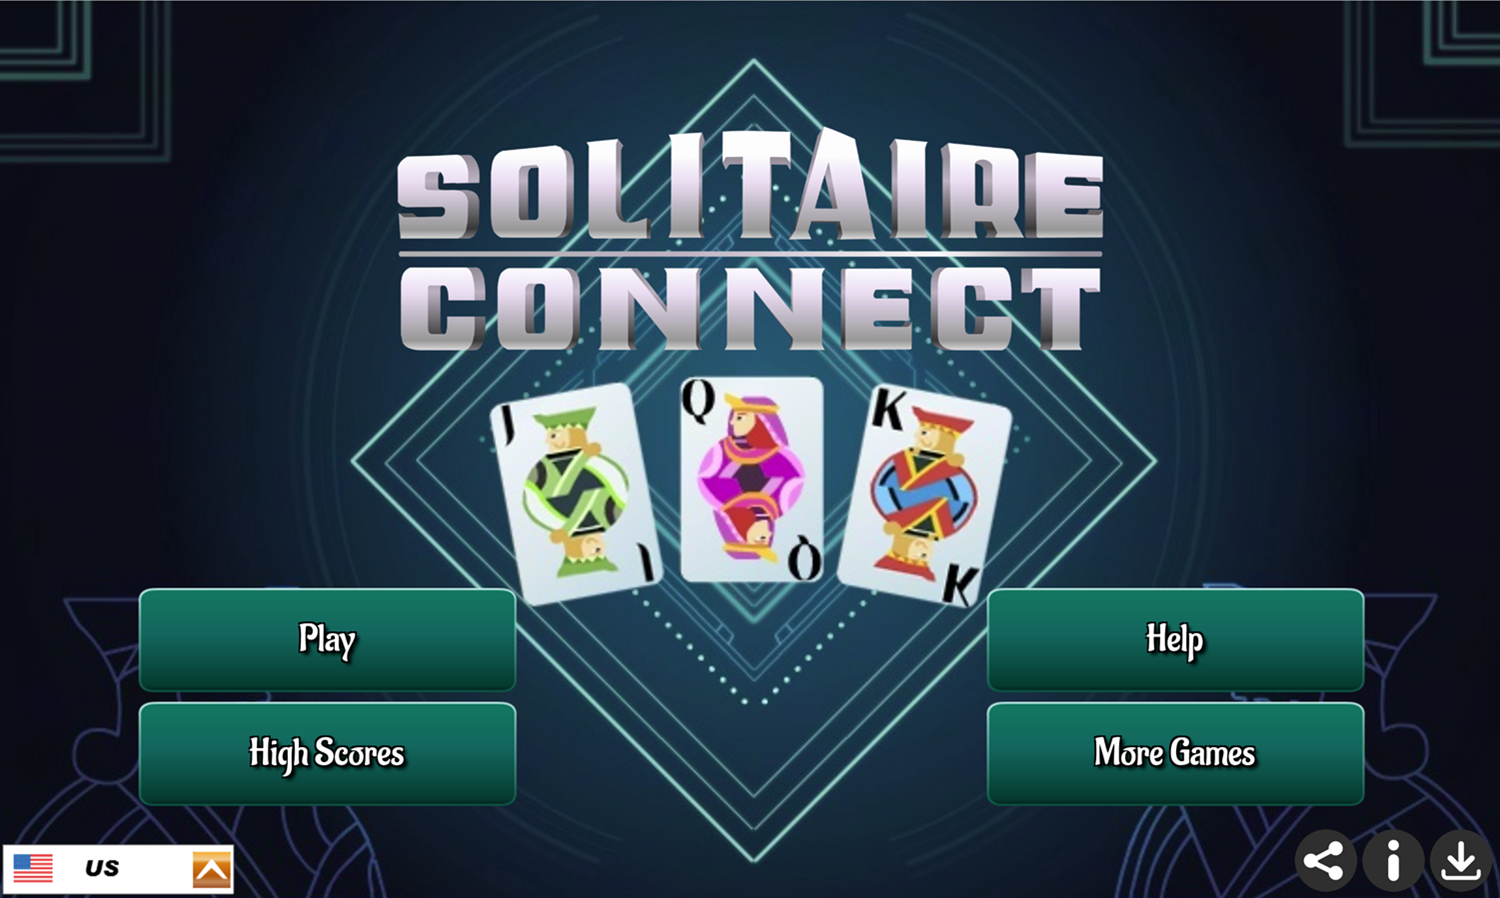 Solitaire Connect Game Welcome Screen Screenshot.